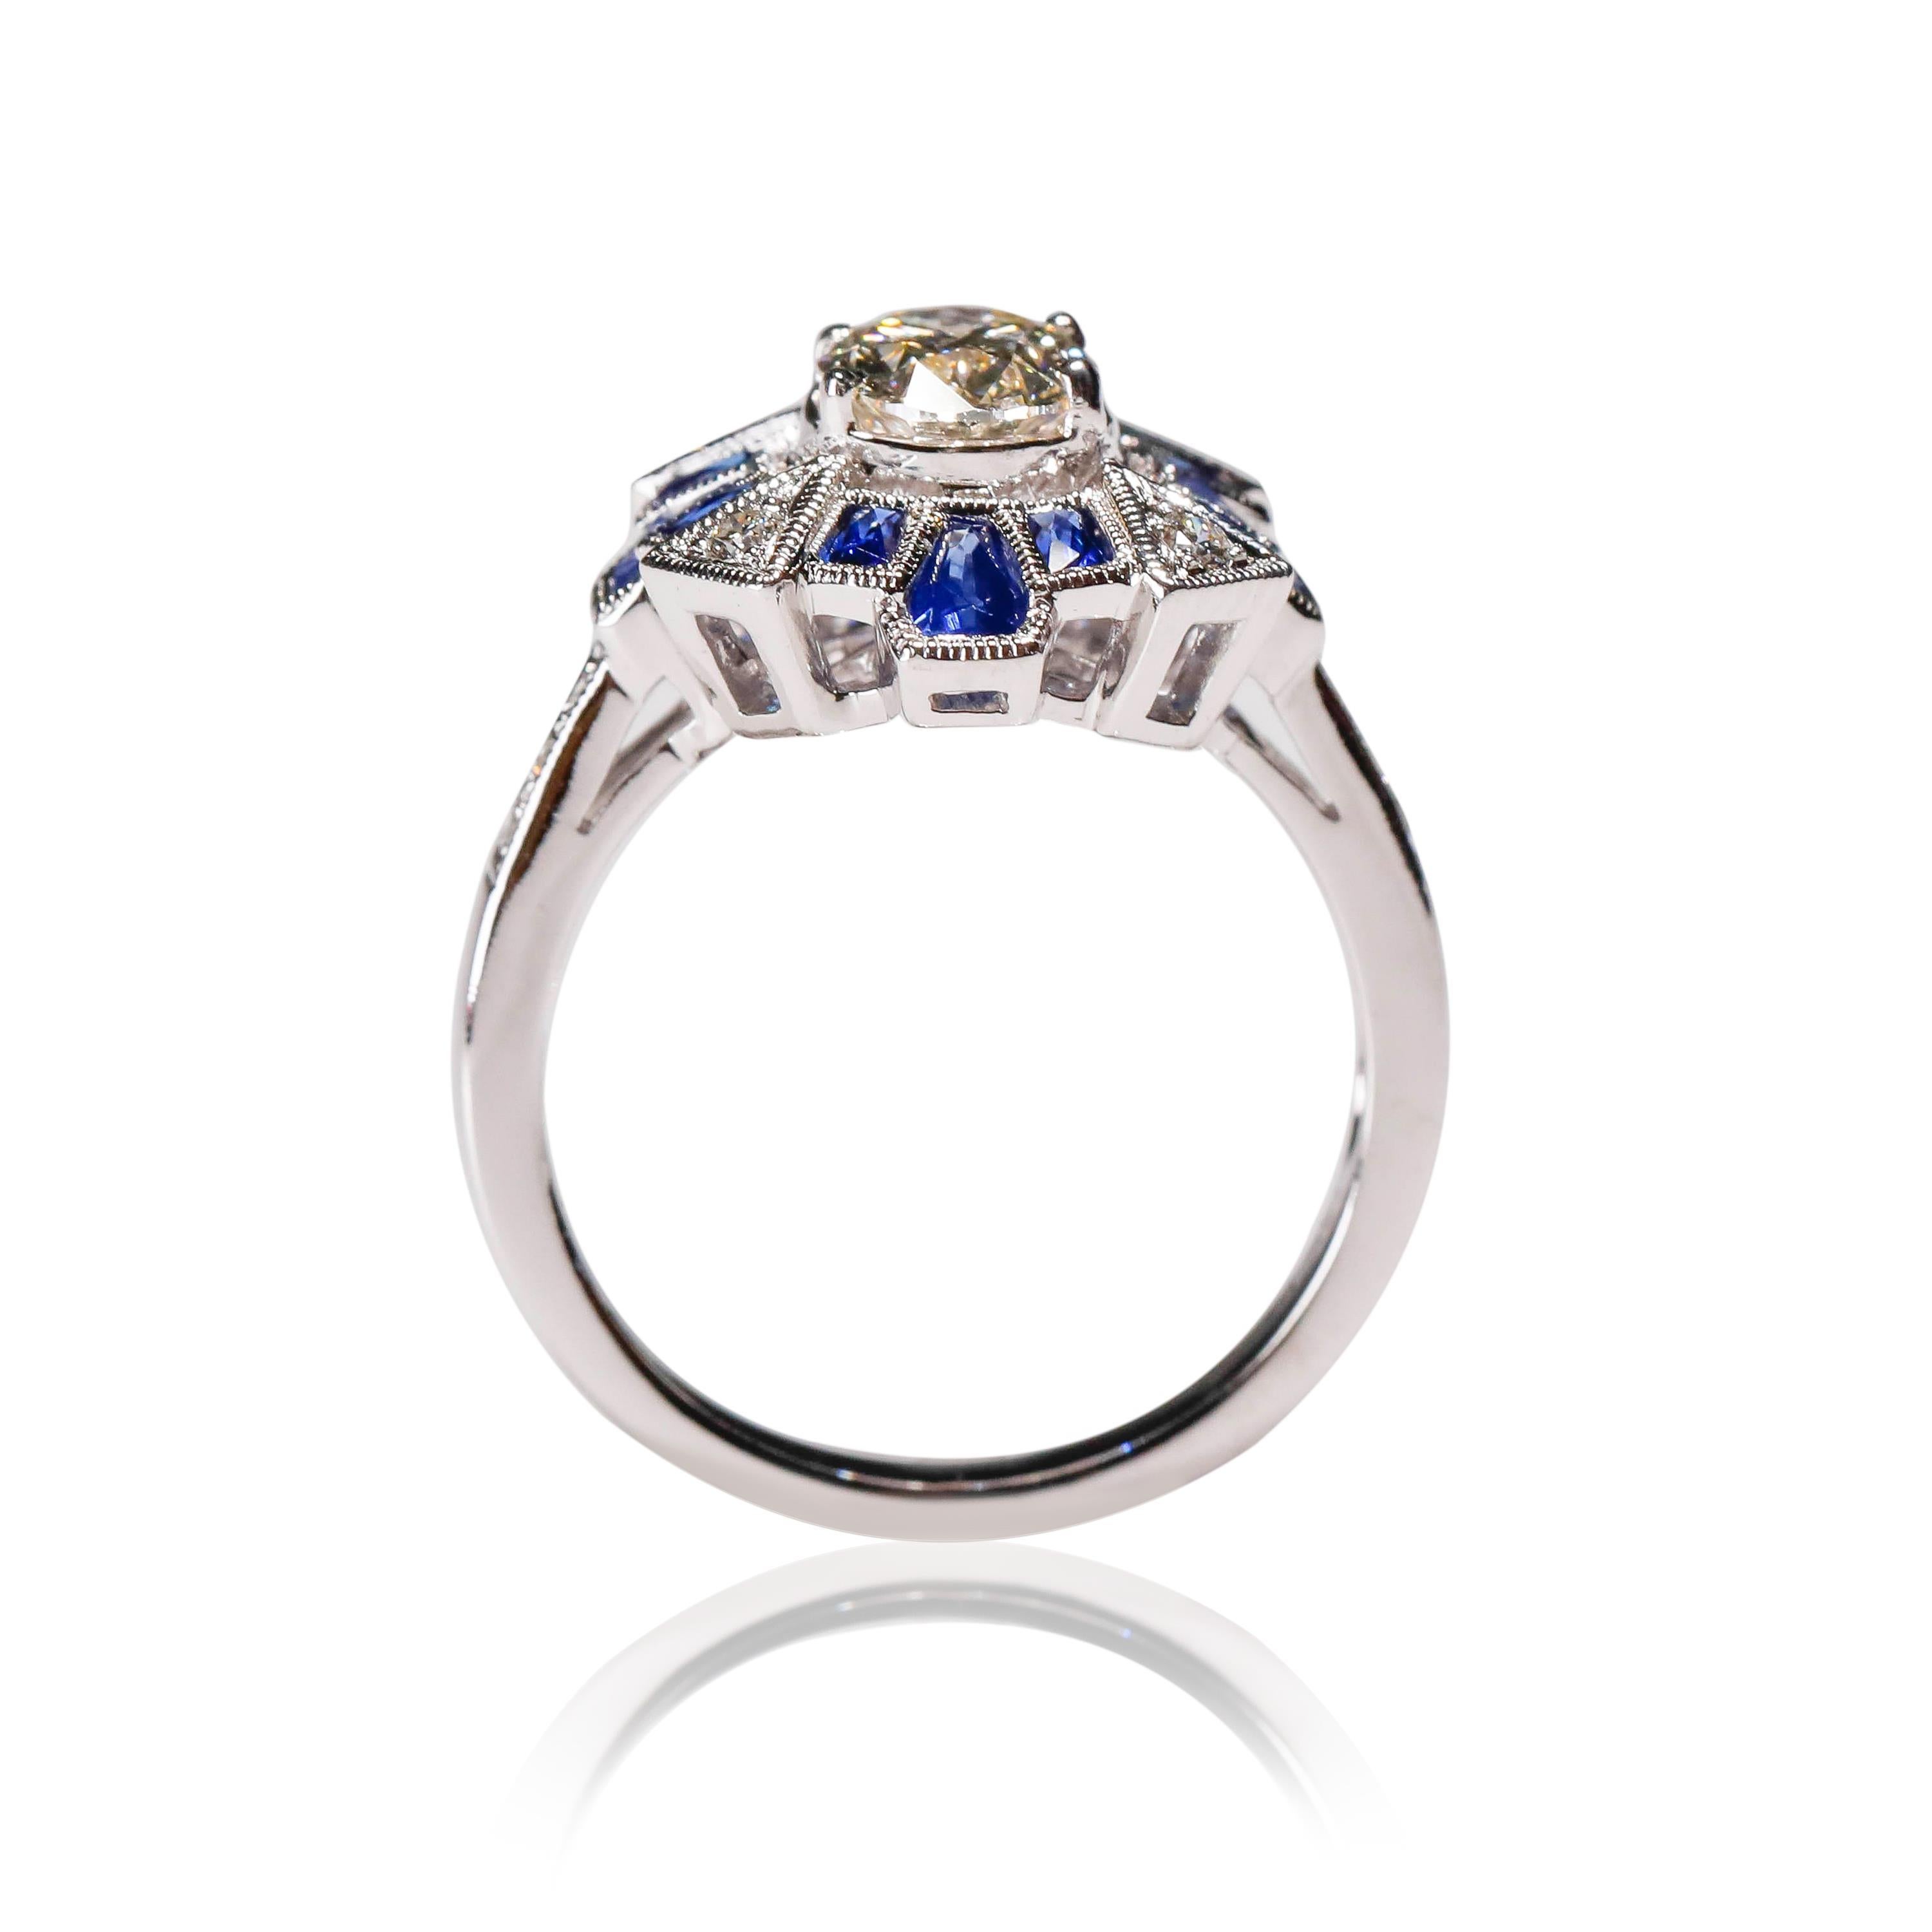 18 Kt Gold 1.17 Carat Diamond 1 Carat Blue Sapphire Round Cocktail Dome Ring

A perfect symbol of your affection. Perfect gift. This gemstone ring showcases a cluster of soft blue sapphires centered in a prong setting, accented by a frame of round